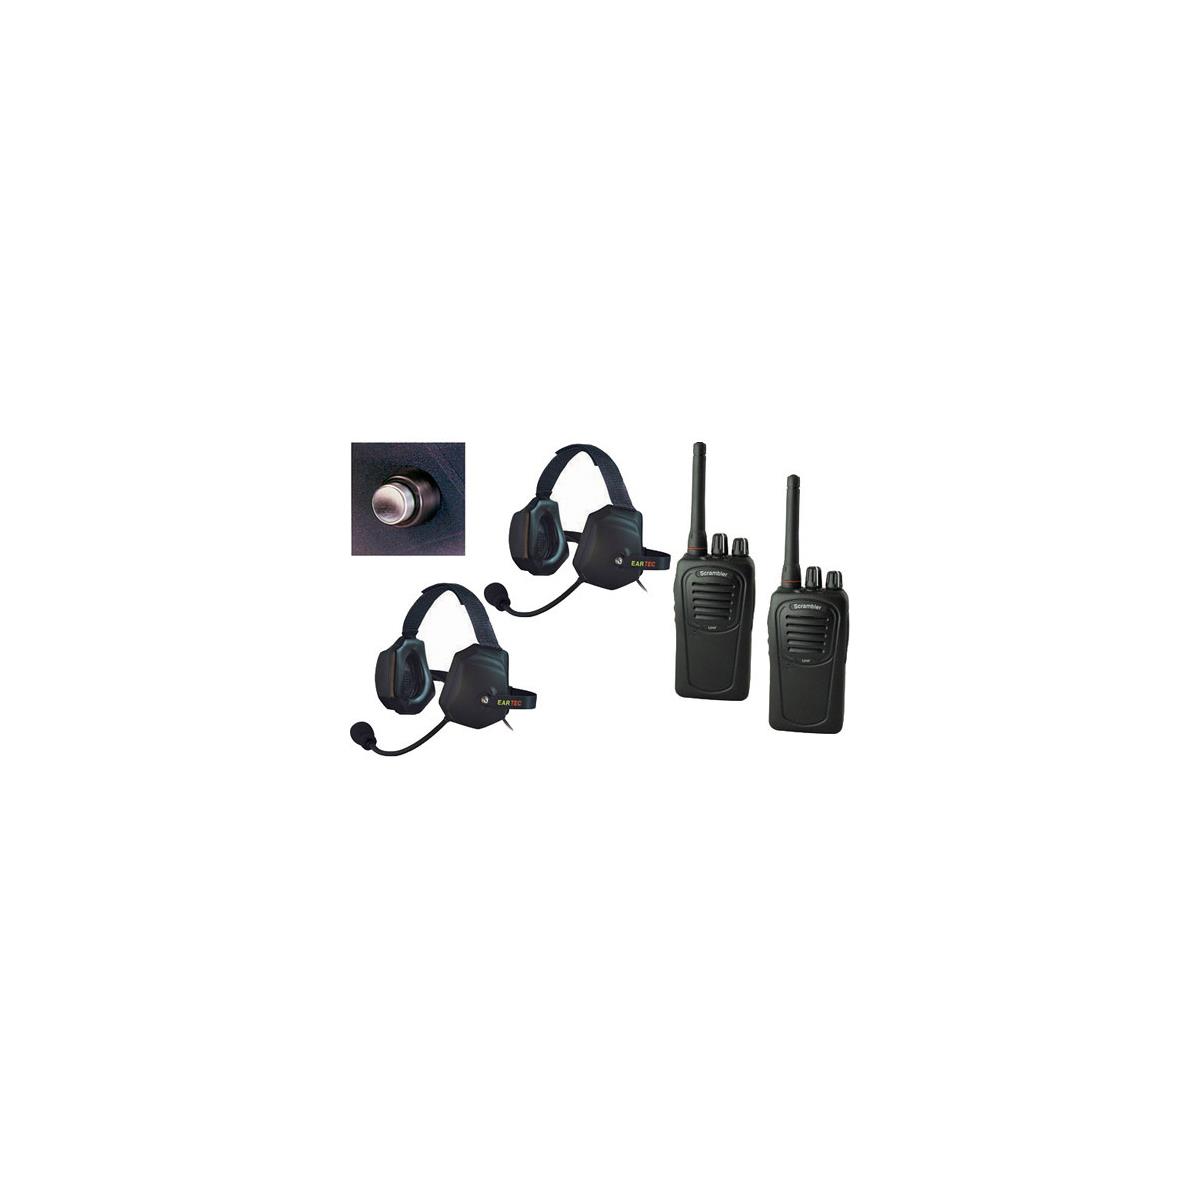 Image of Eartec SC-1000 2-User 2-Way Radio System with 2x Xtreme Shell Mount PTT Headsets